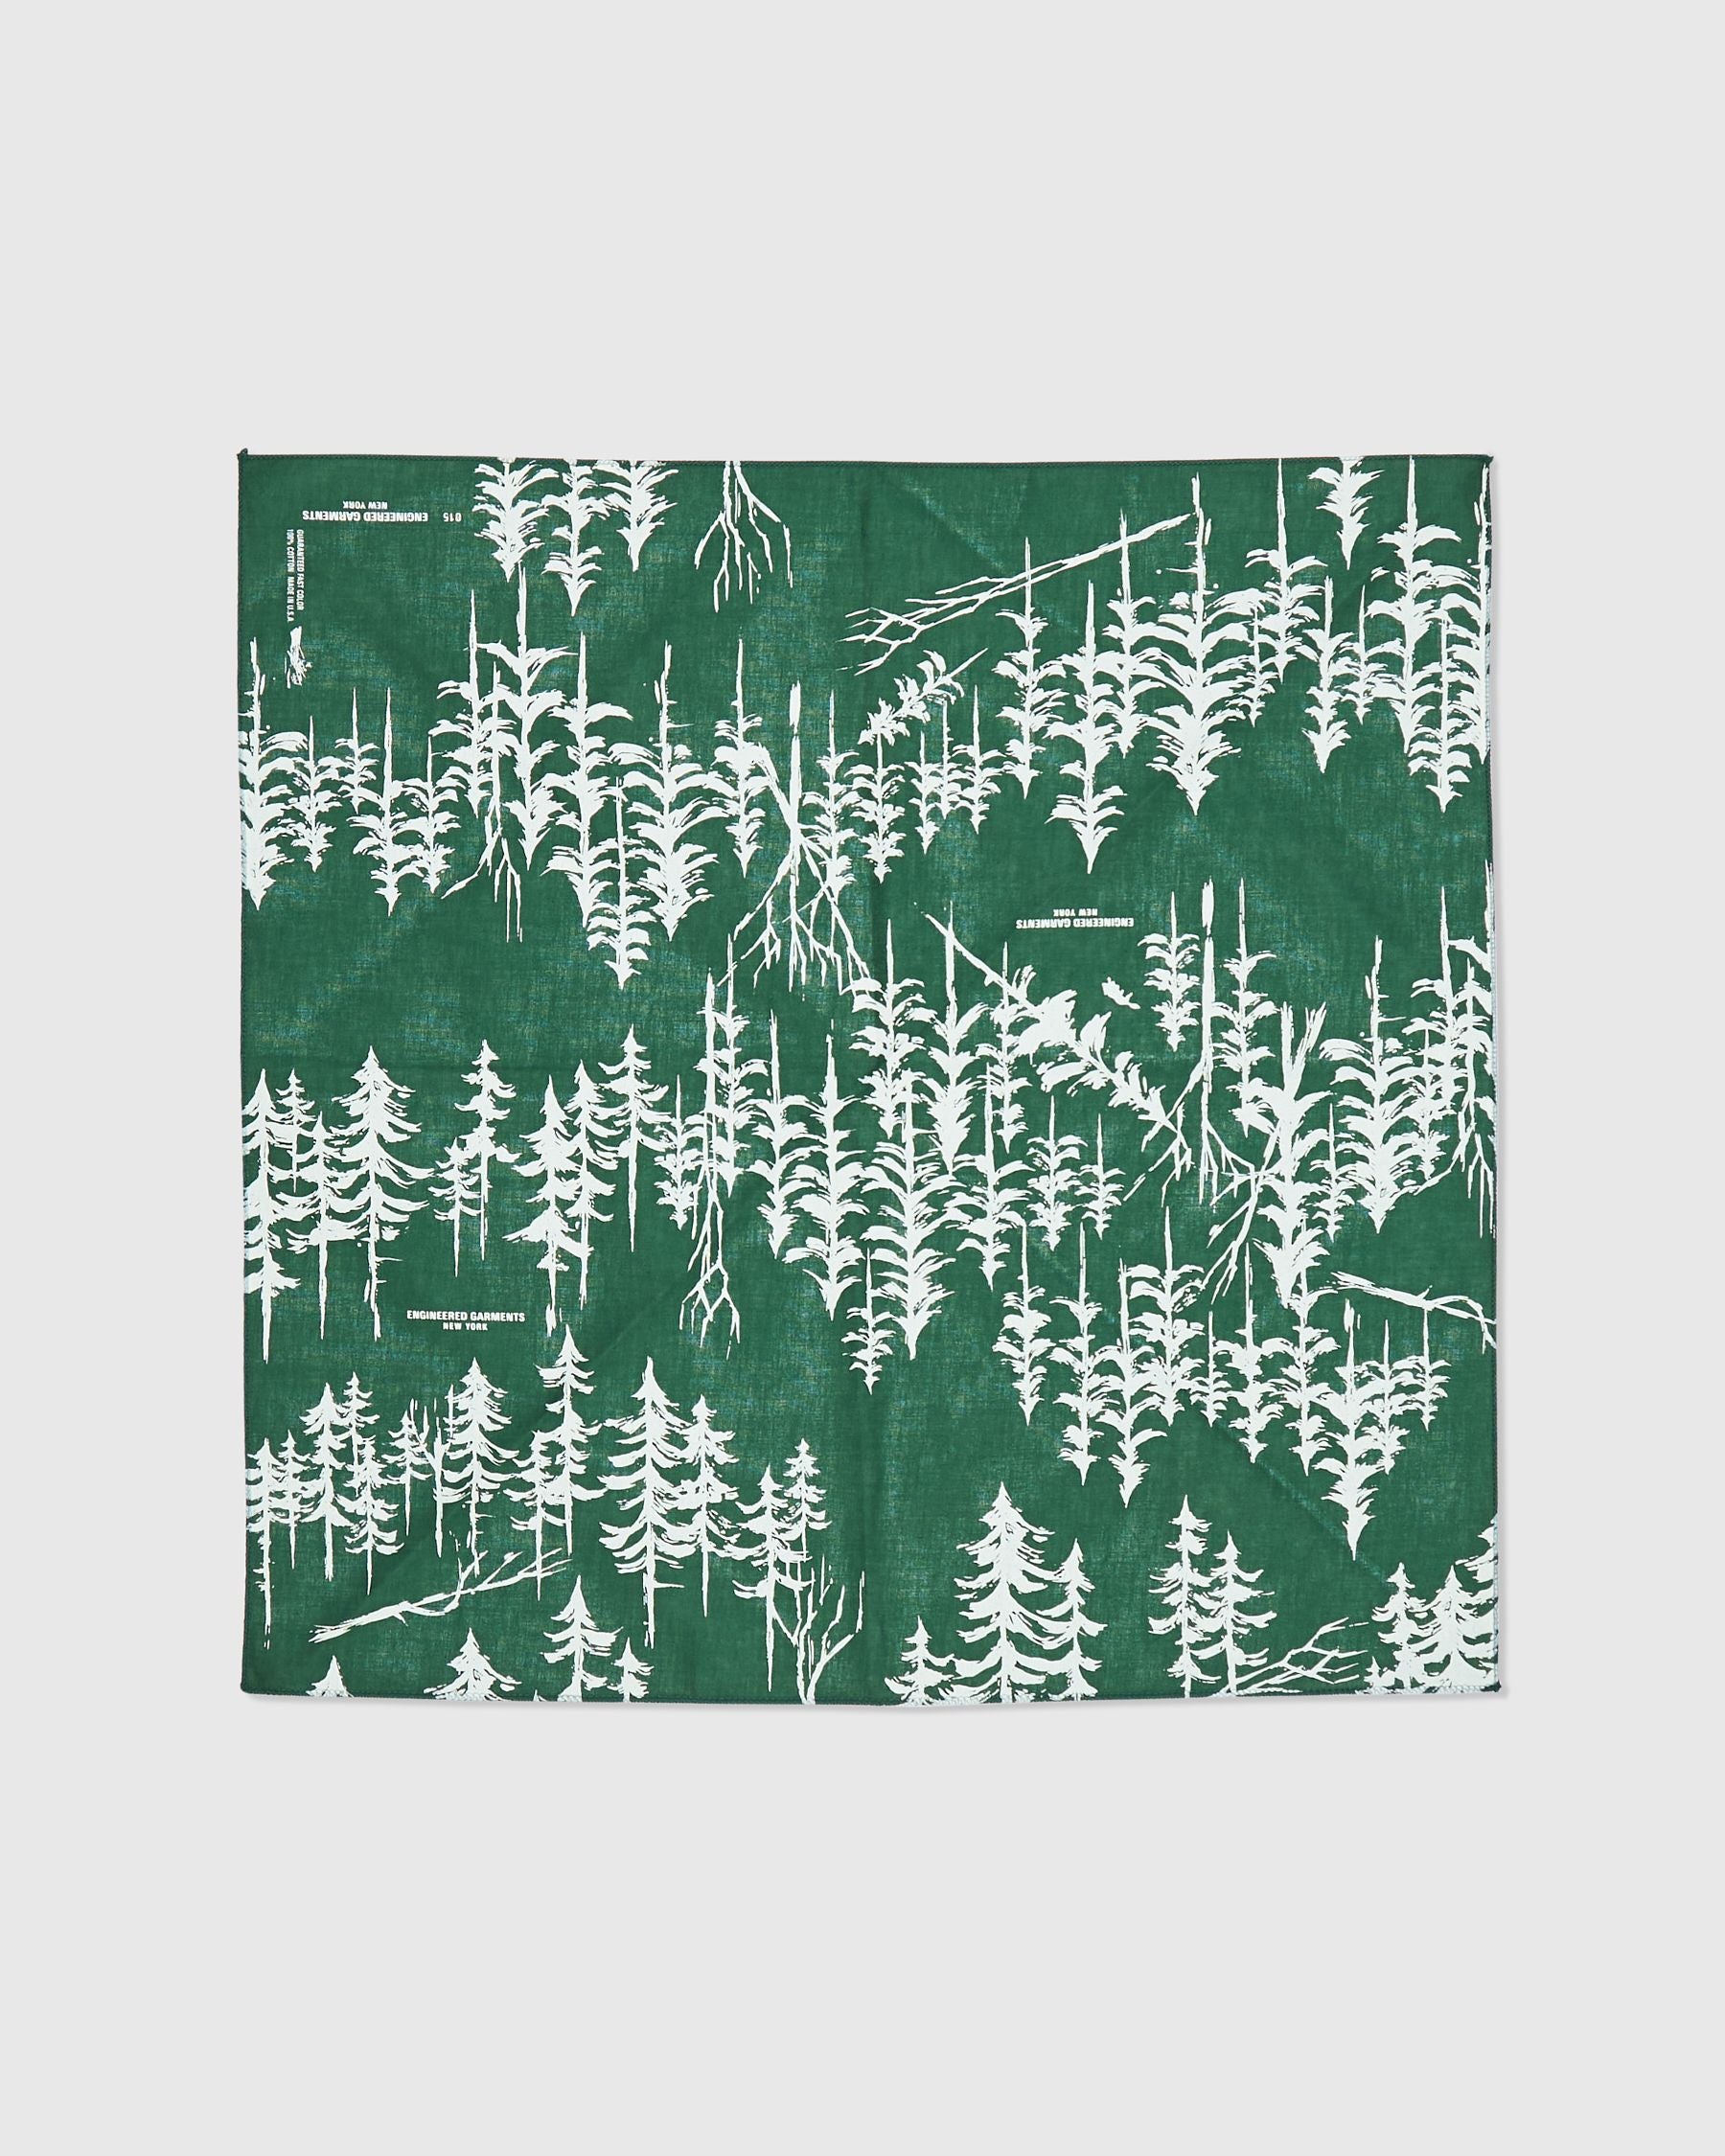 Printed Bandana in Green Forest